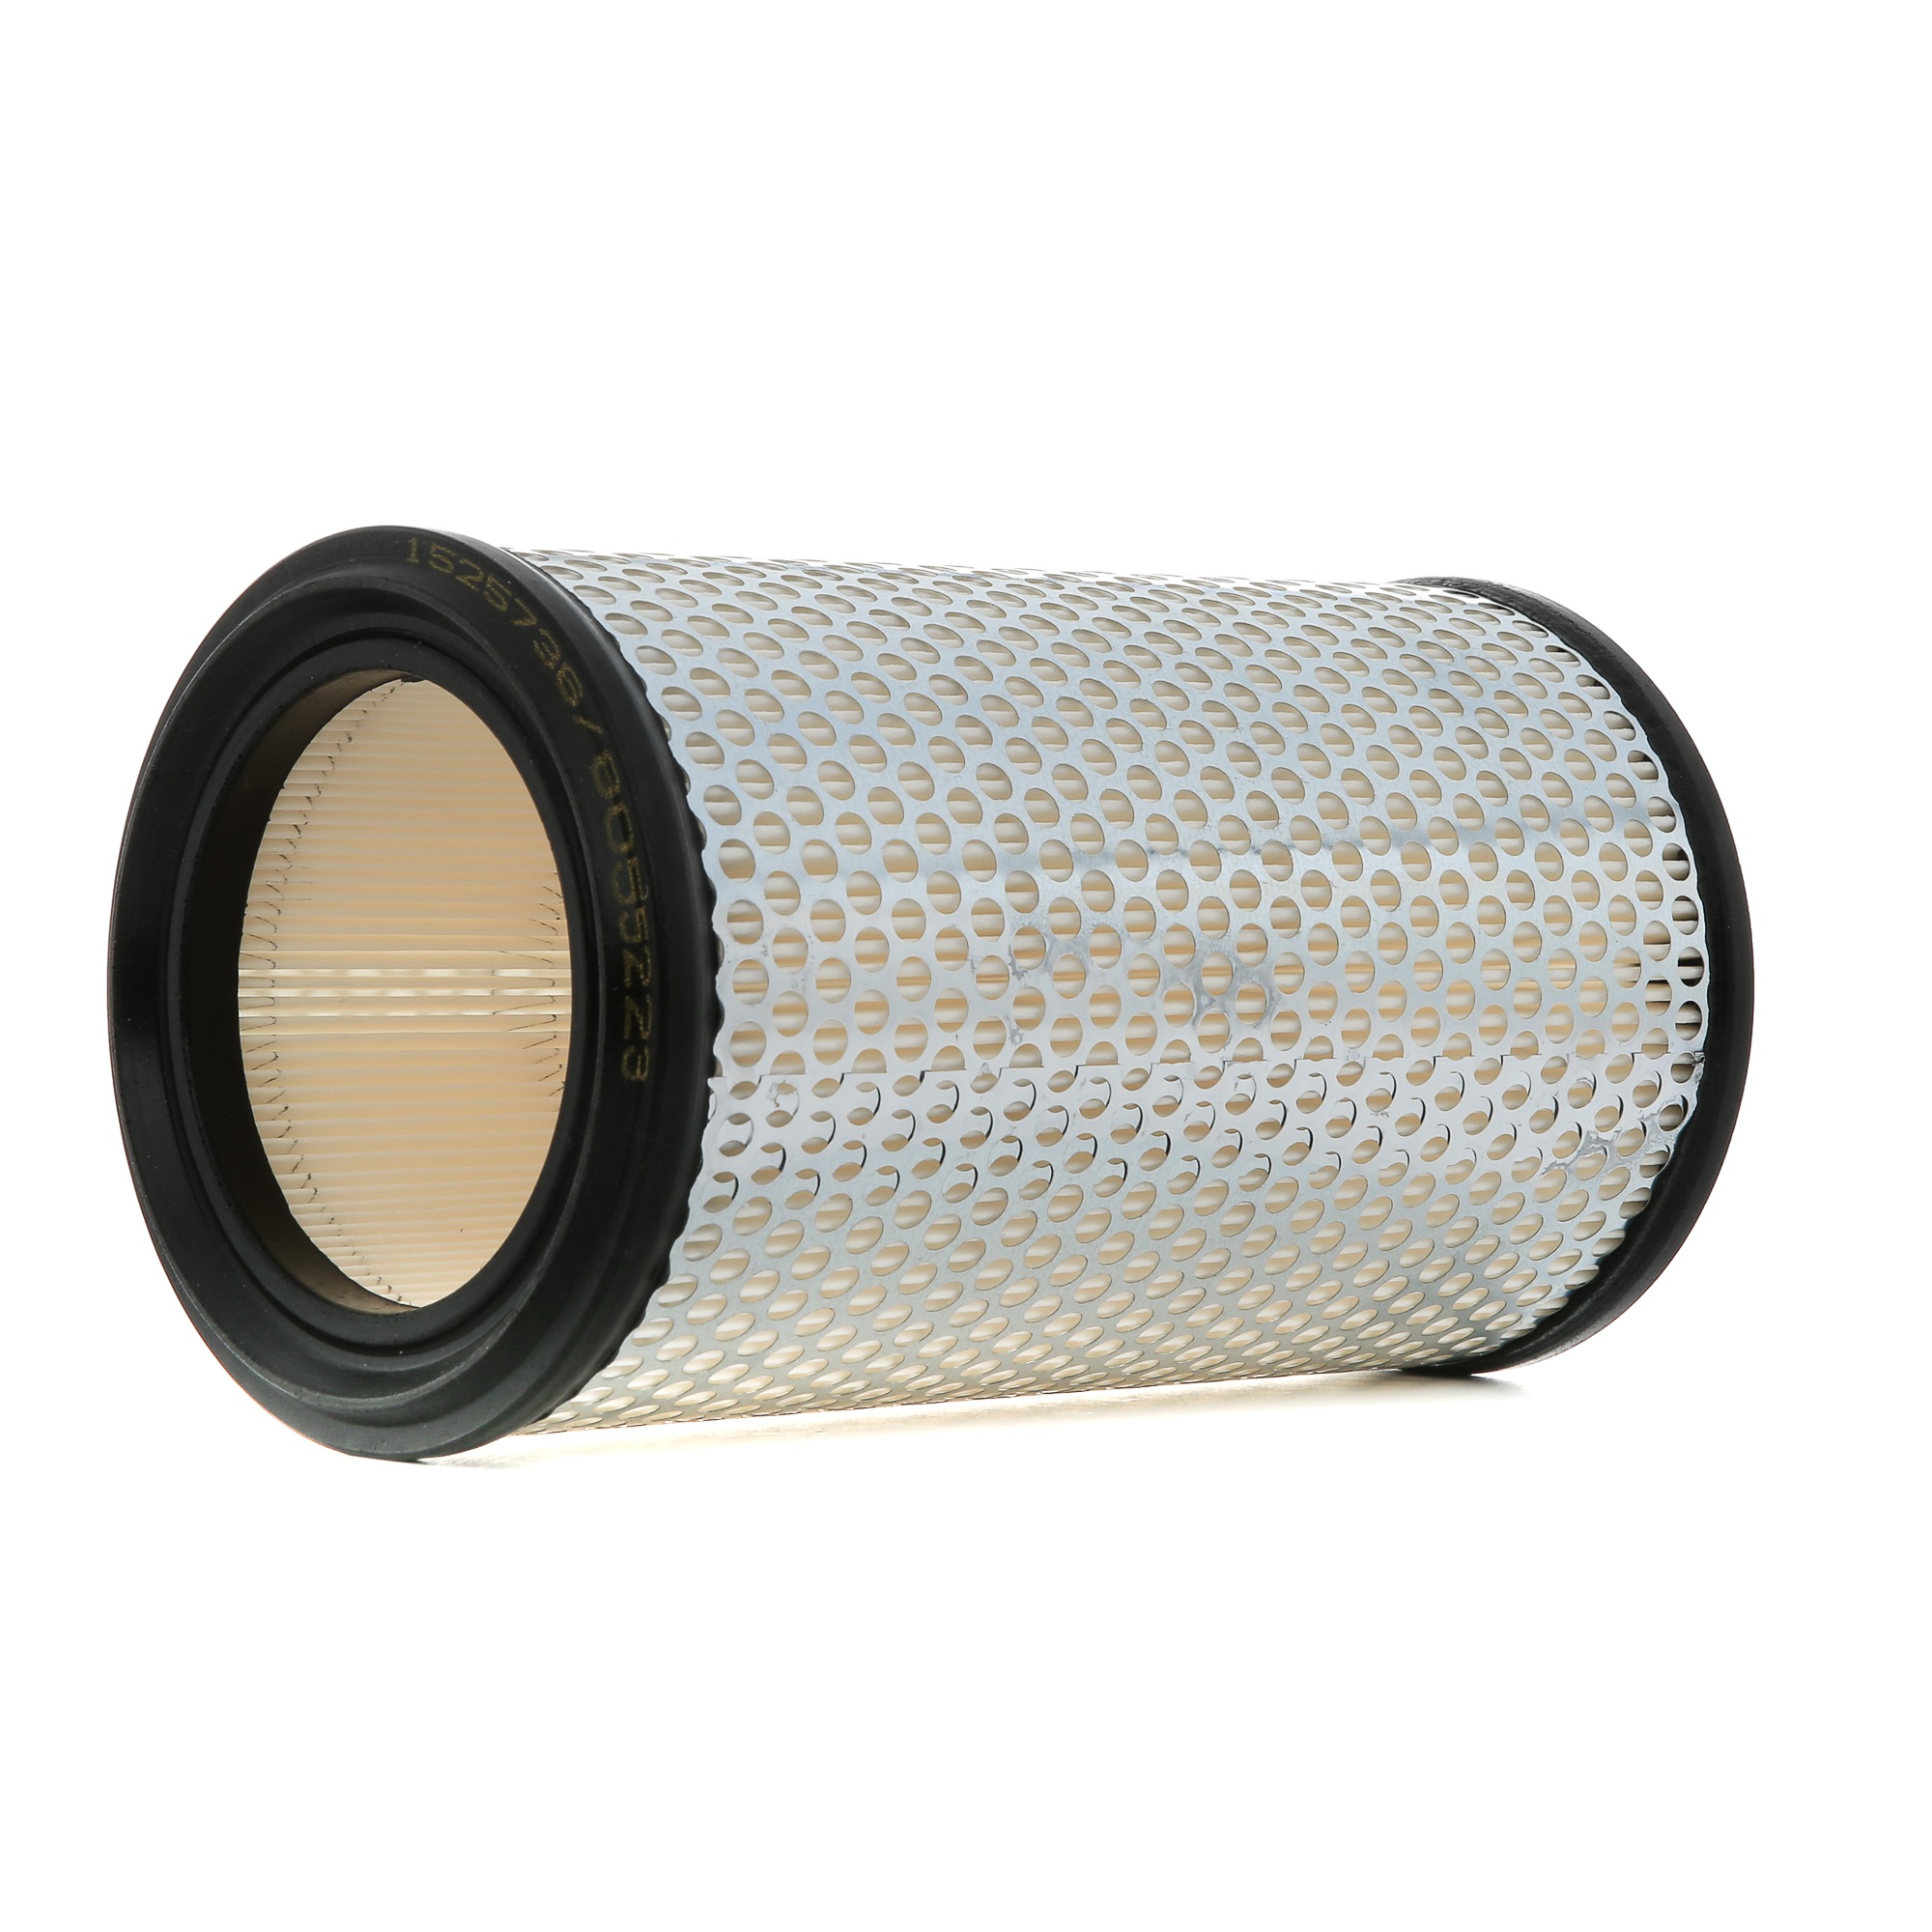 RIDEX 220mm, 127, 128,5mm, Filter Insert, Centrifuge, with cover mesh Height: 220mm Engine air filter 8A0364 buy